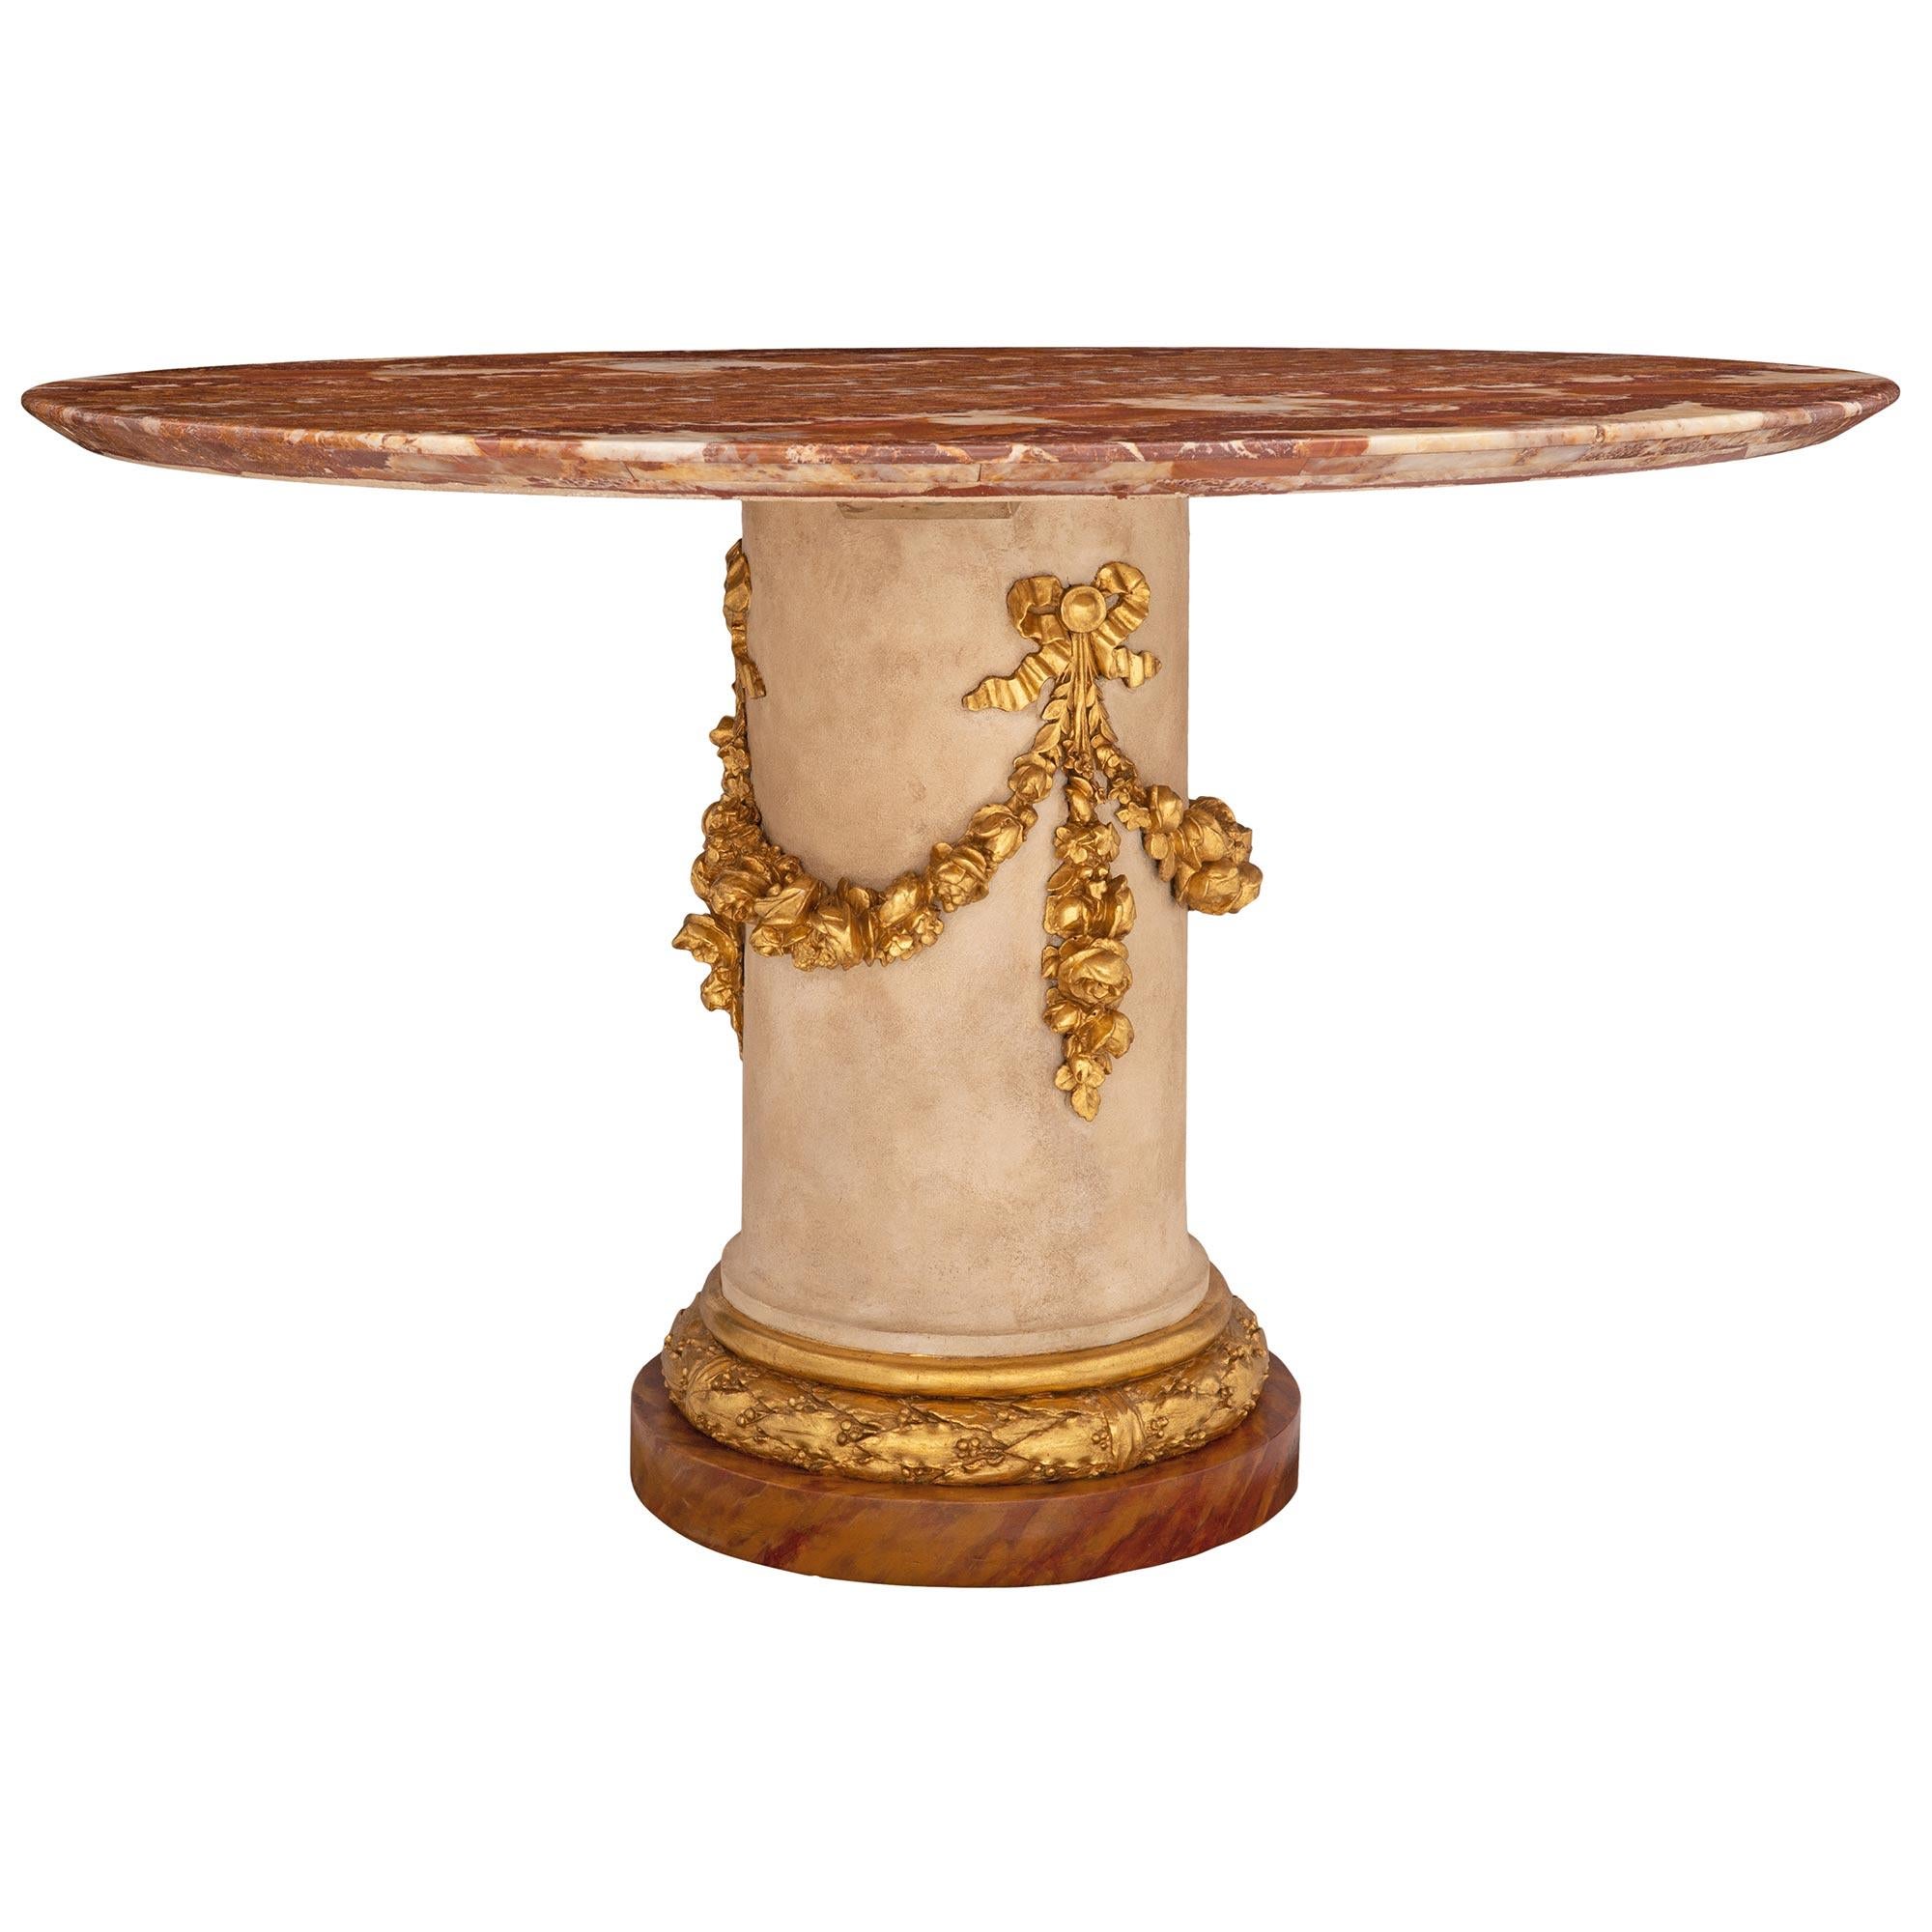 Italian 19th Century Onyx, Faux Marble, and Giltwood Center/Dining Table For Sale 2